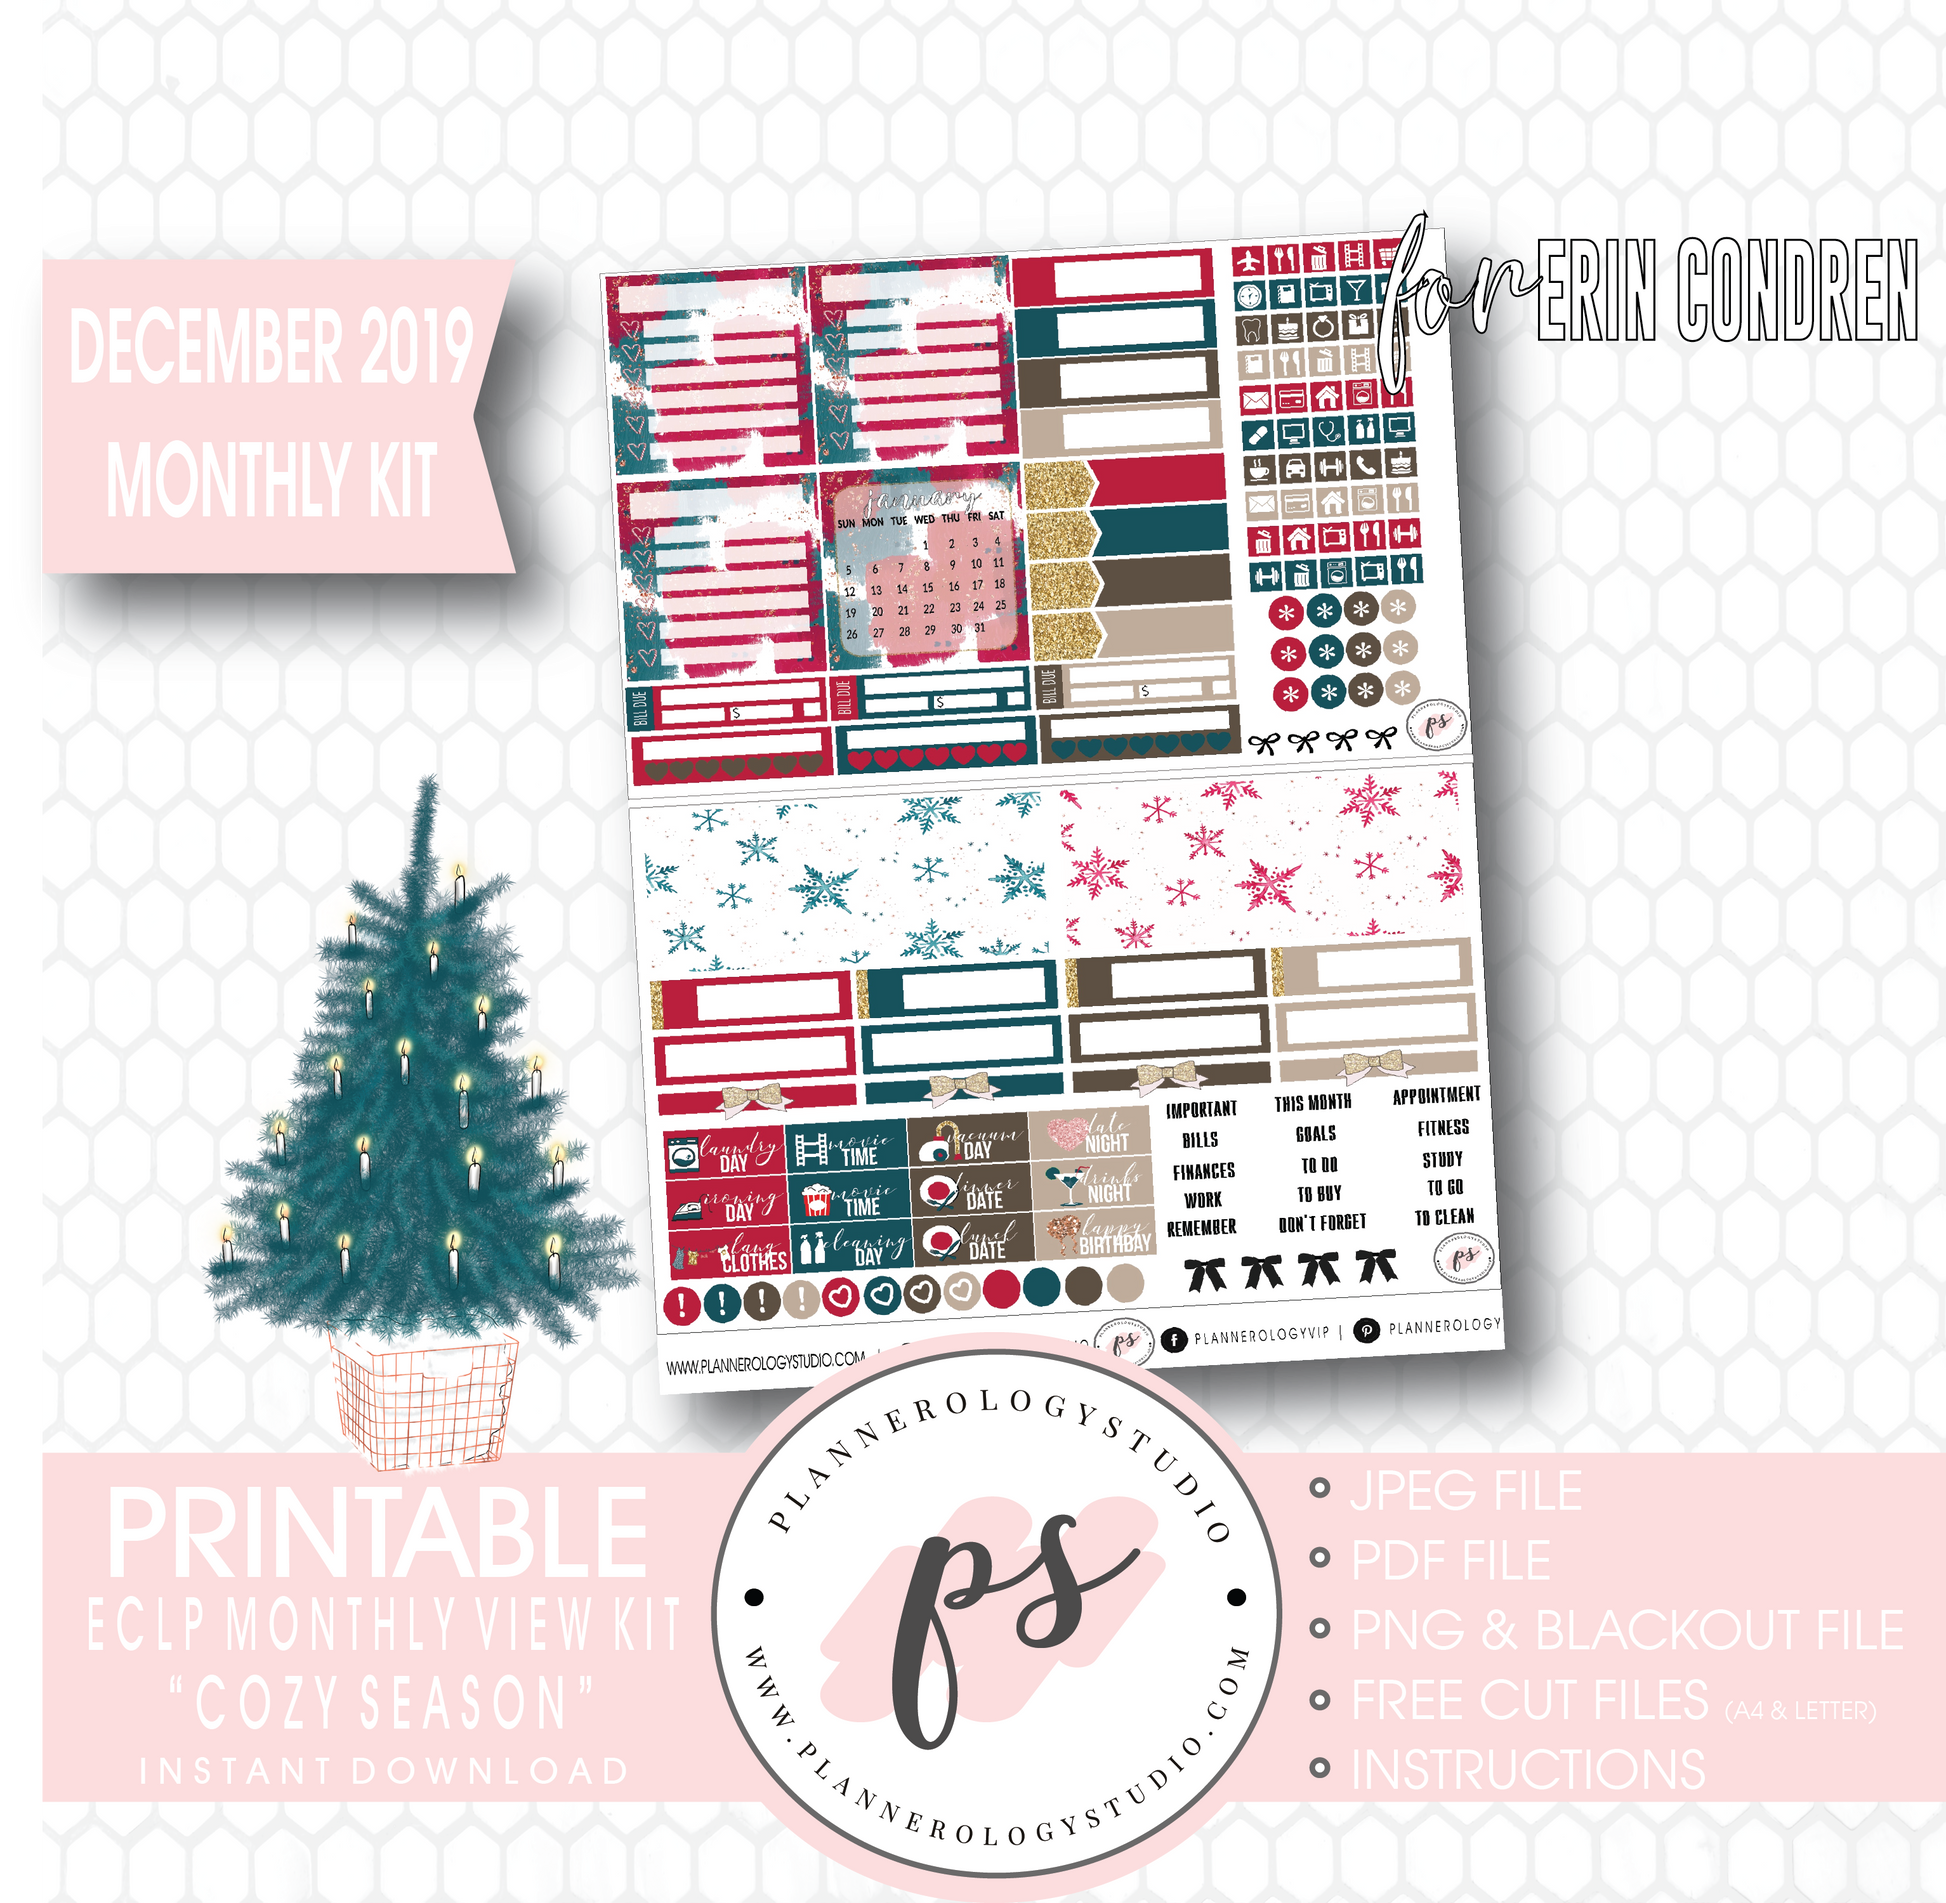 Cozy Season (Christmas) December 2019 Monthly View Kit Digital Printable Planner Stickers (for use with Erin Condren) - Plannerologystudio